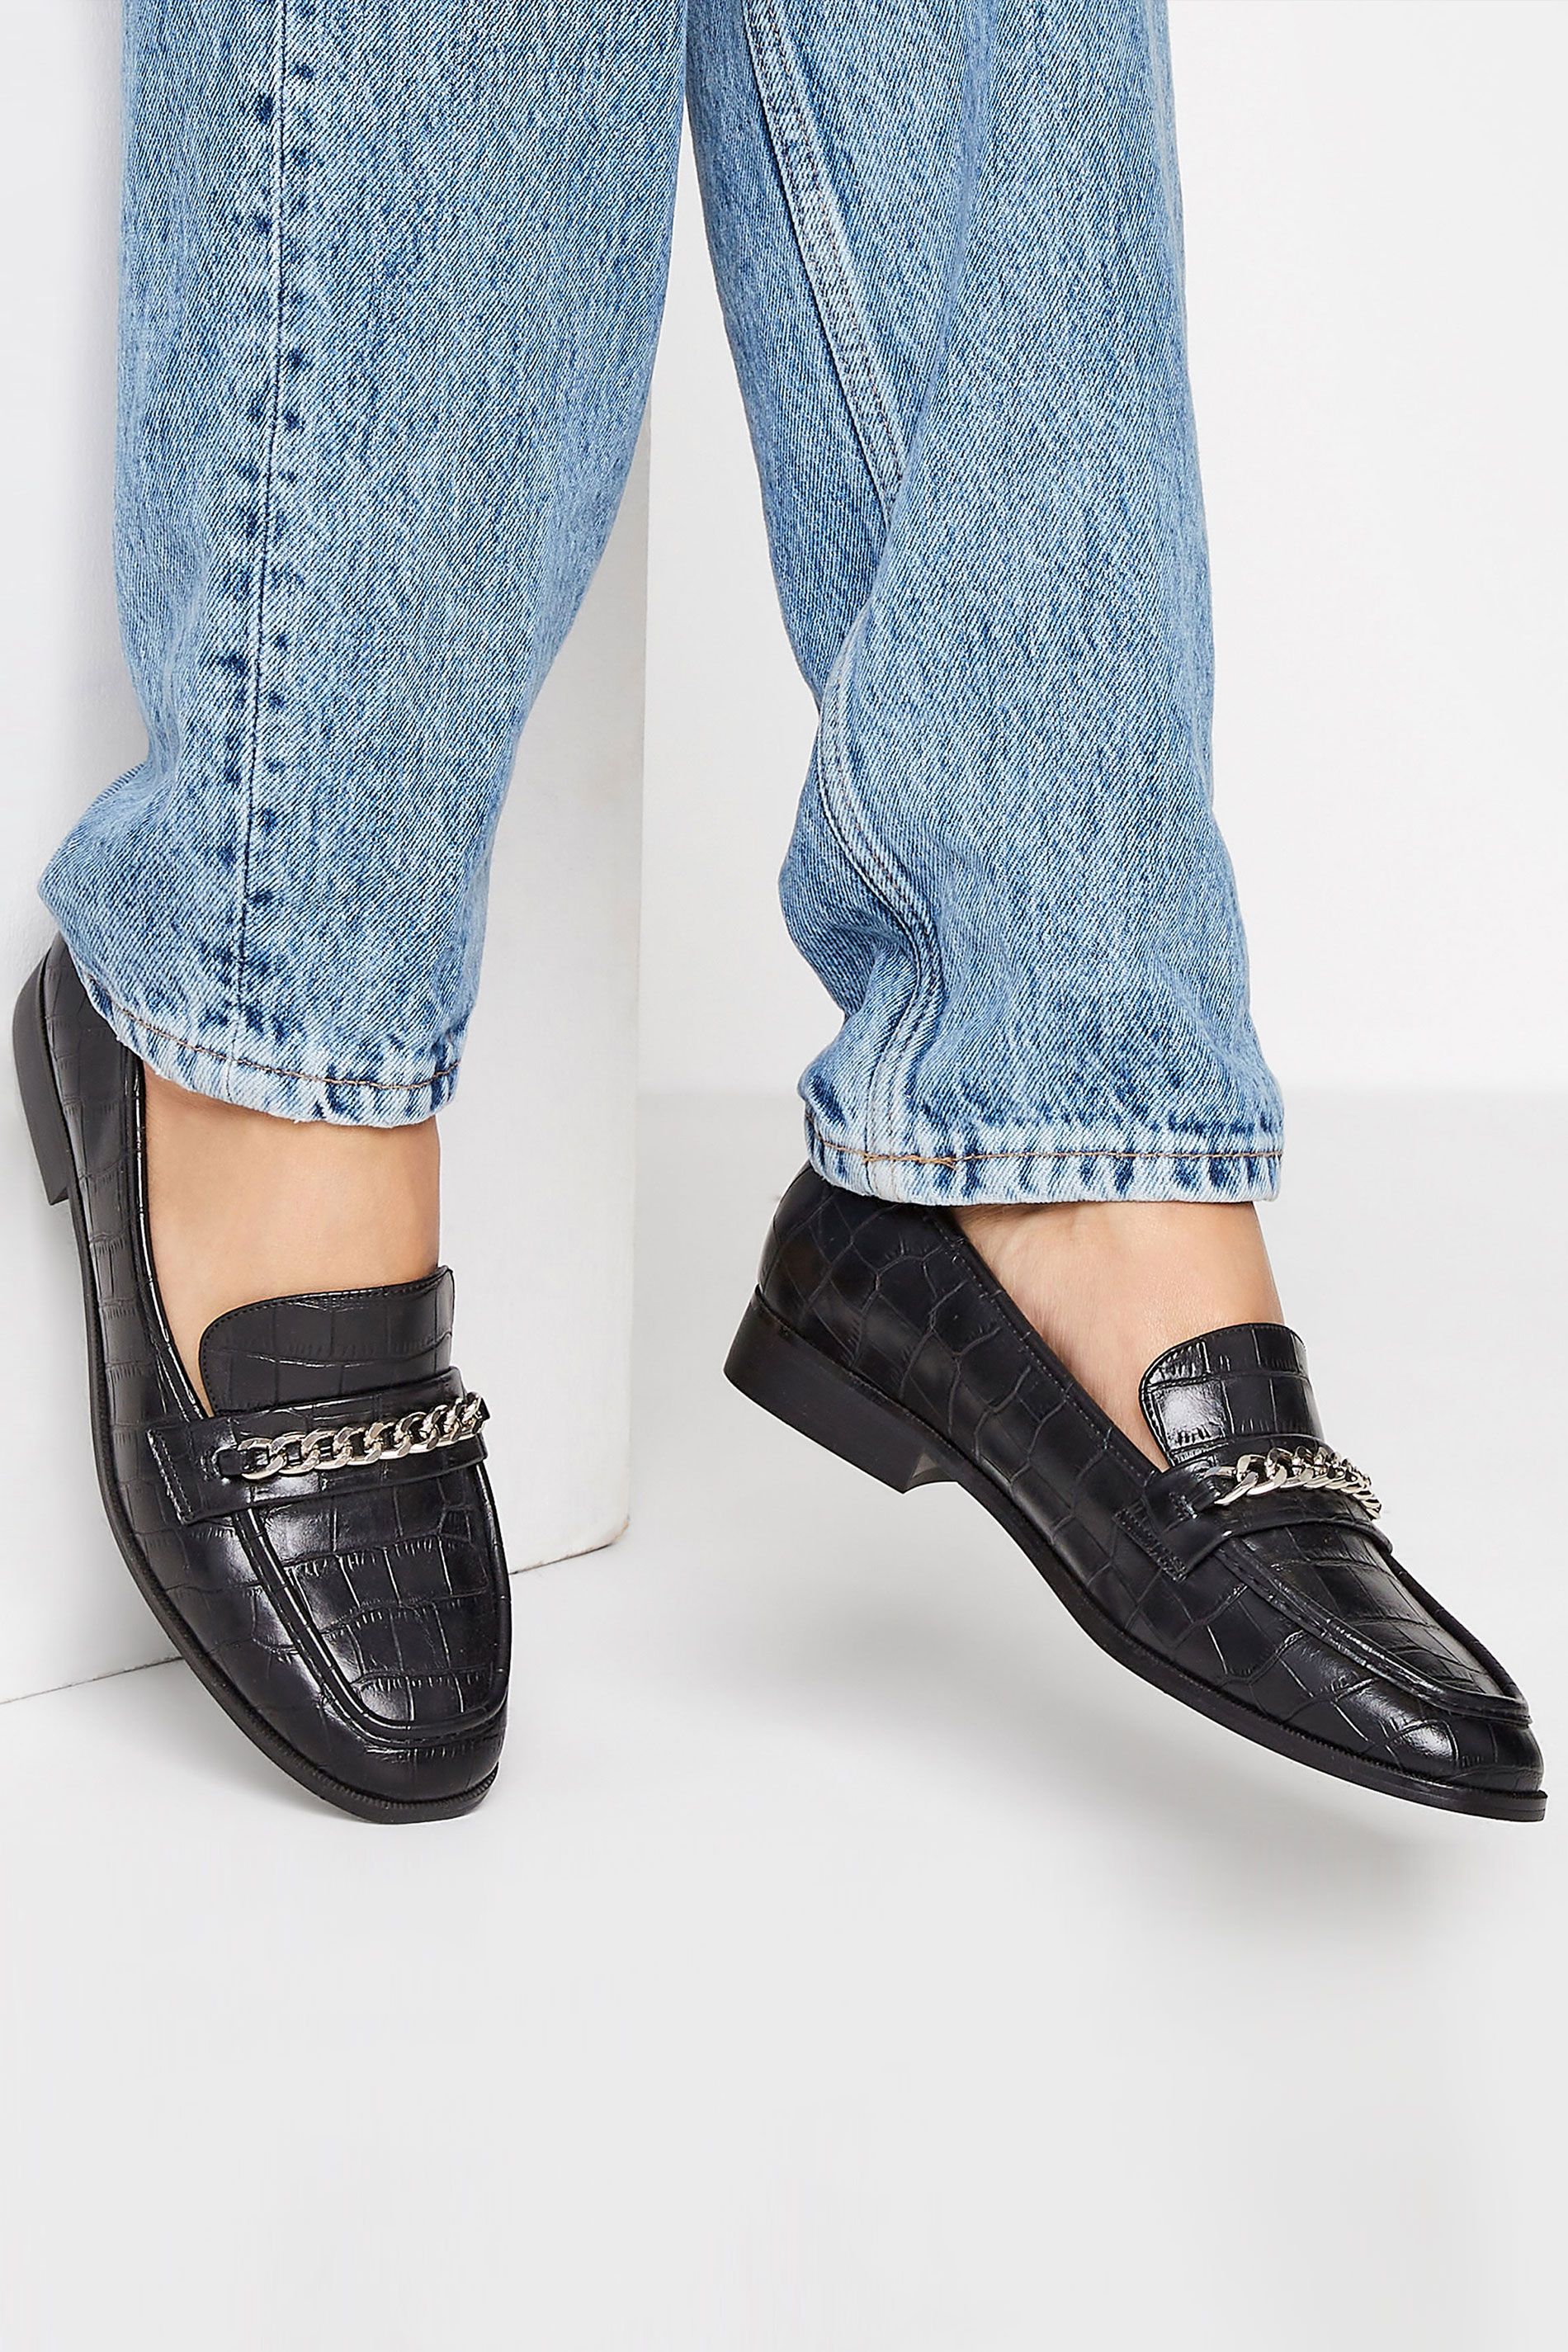 LTS Black Croc Chain Detail Loafers | Long Tall Sally